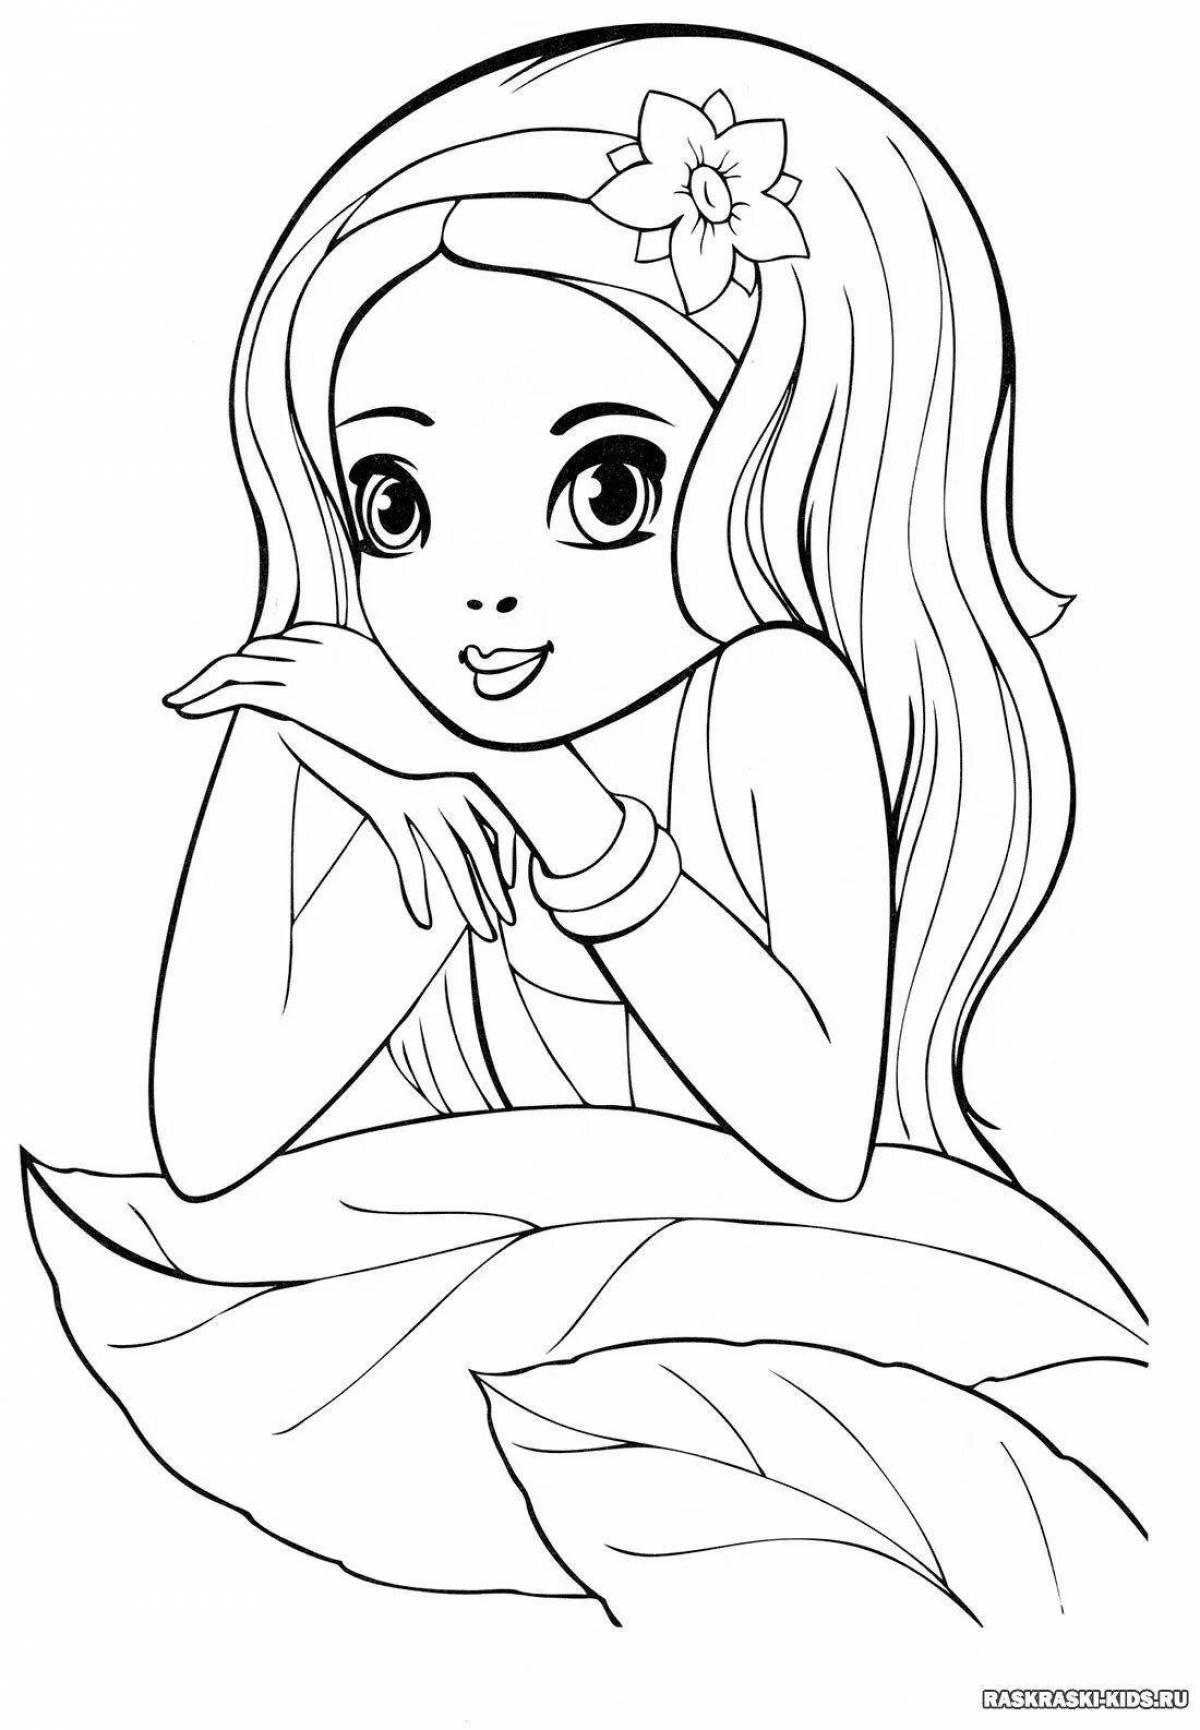 Adorable coloring pages for 8 year olds